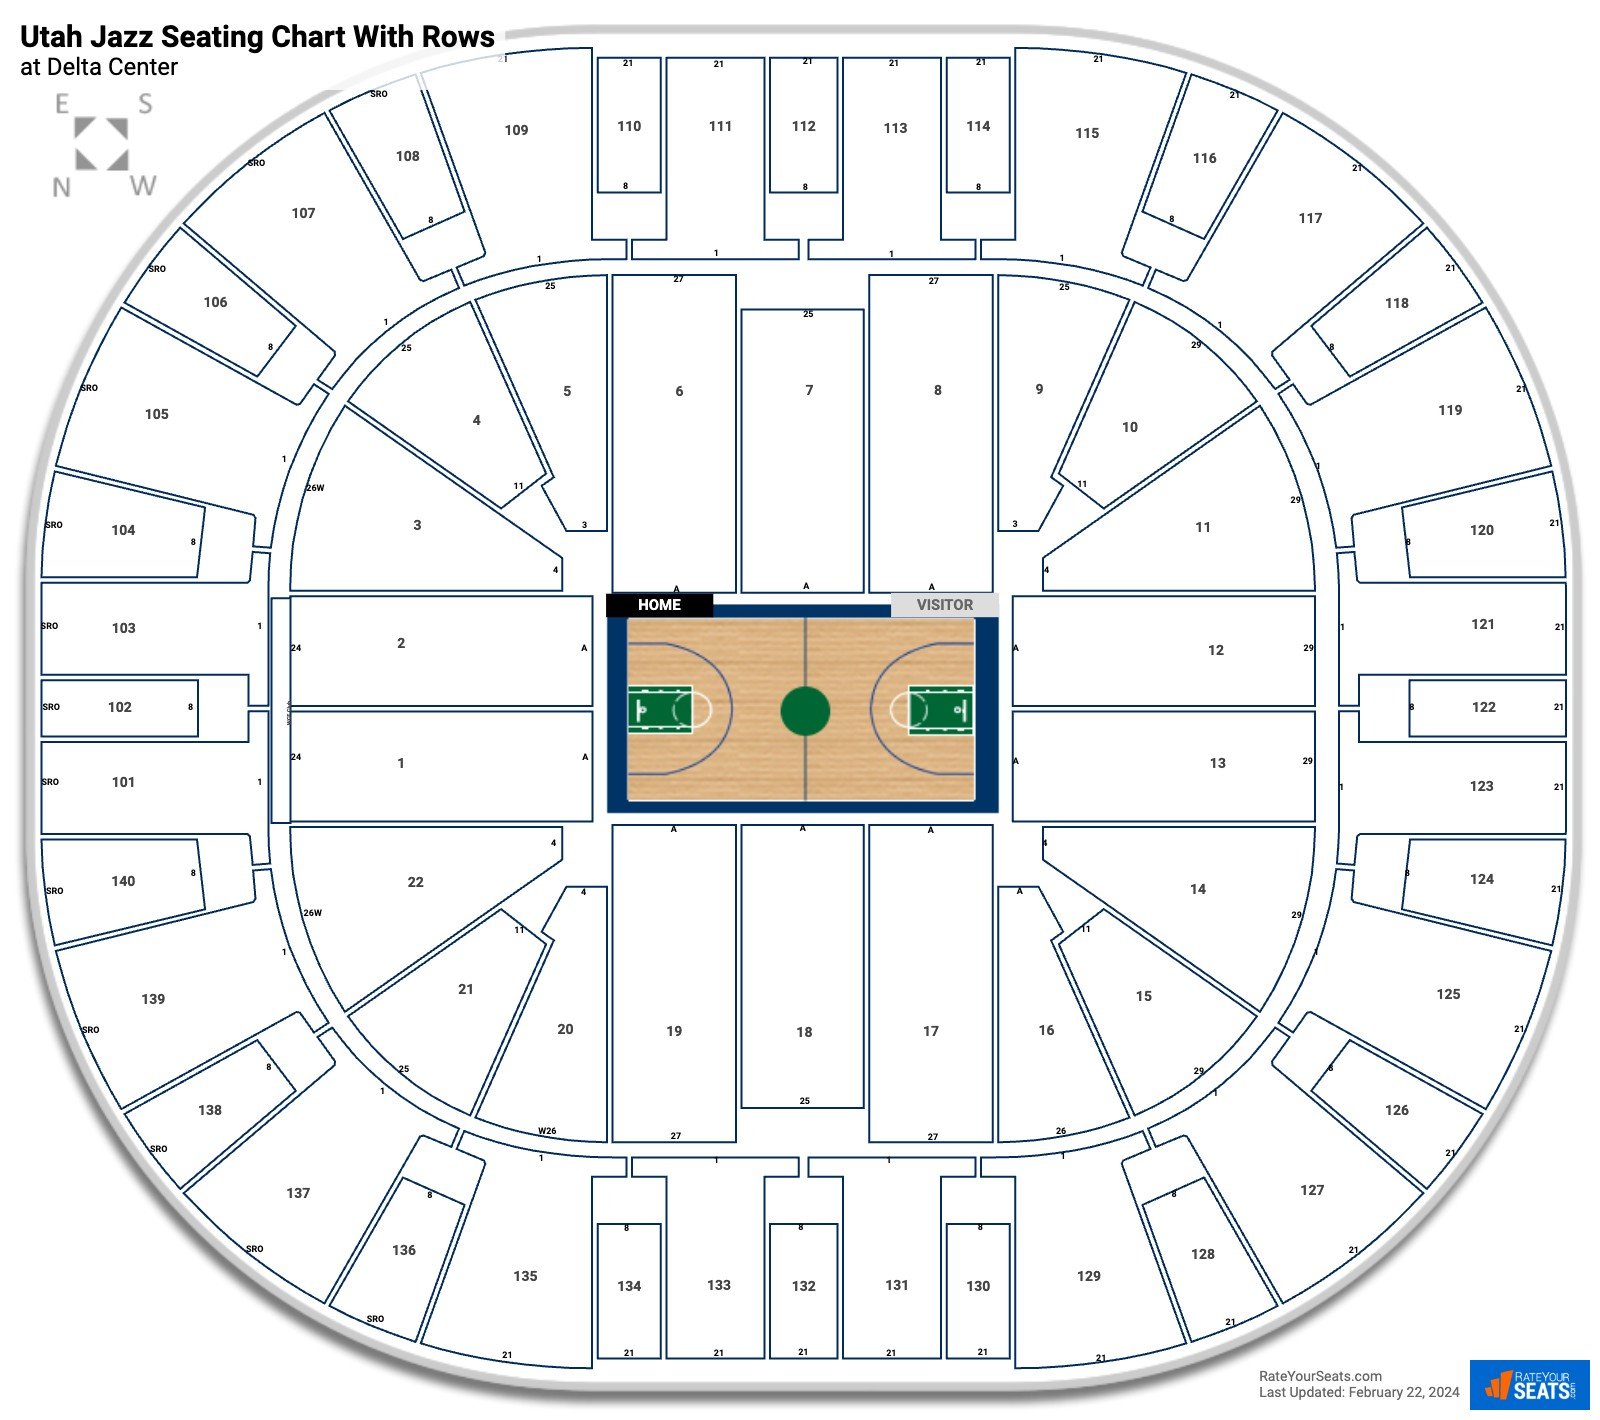 Vivint Arena seating chart with row numbers